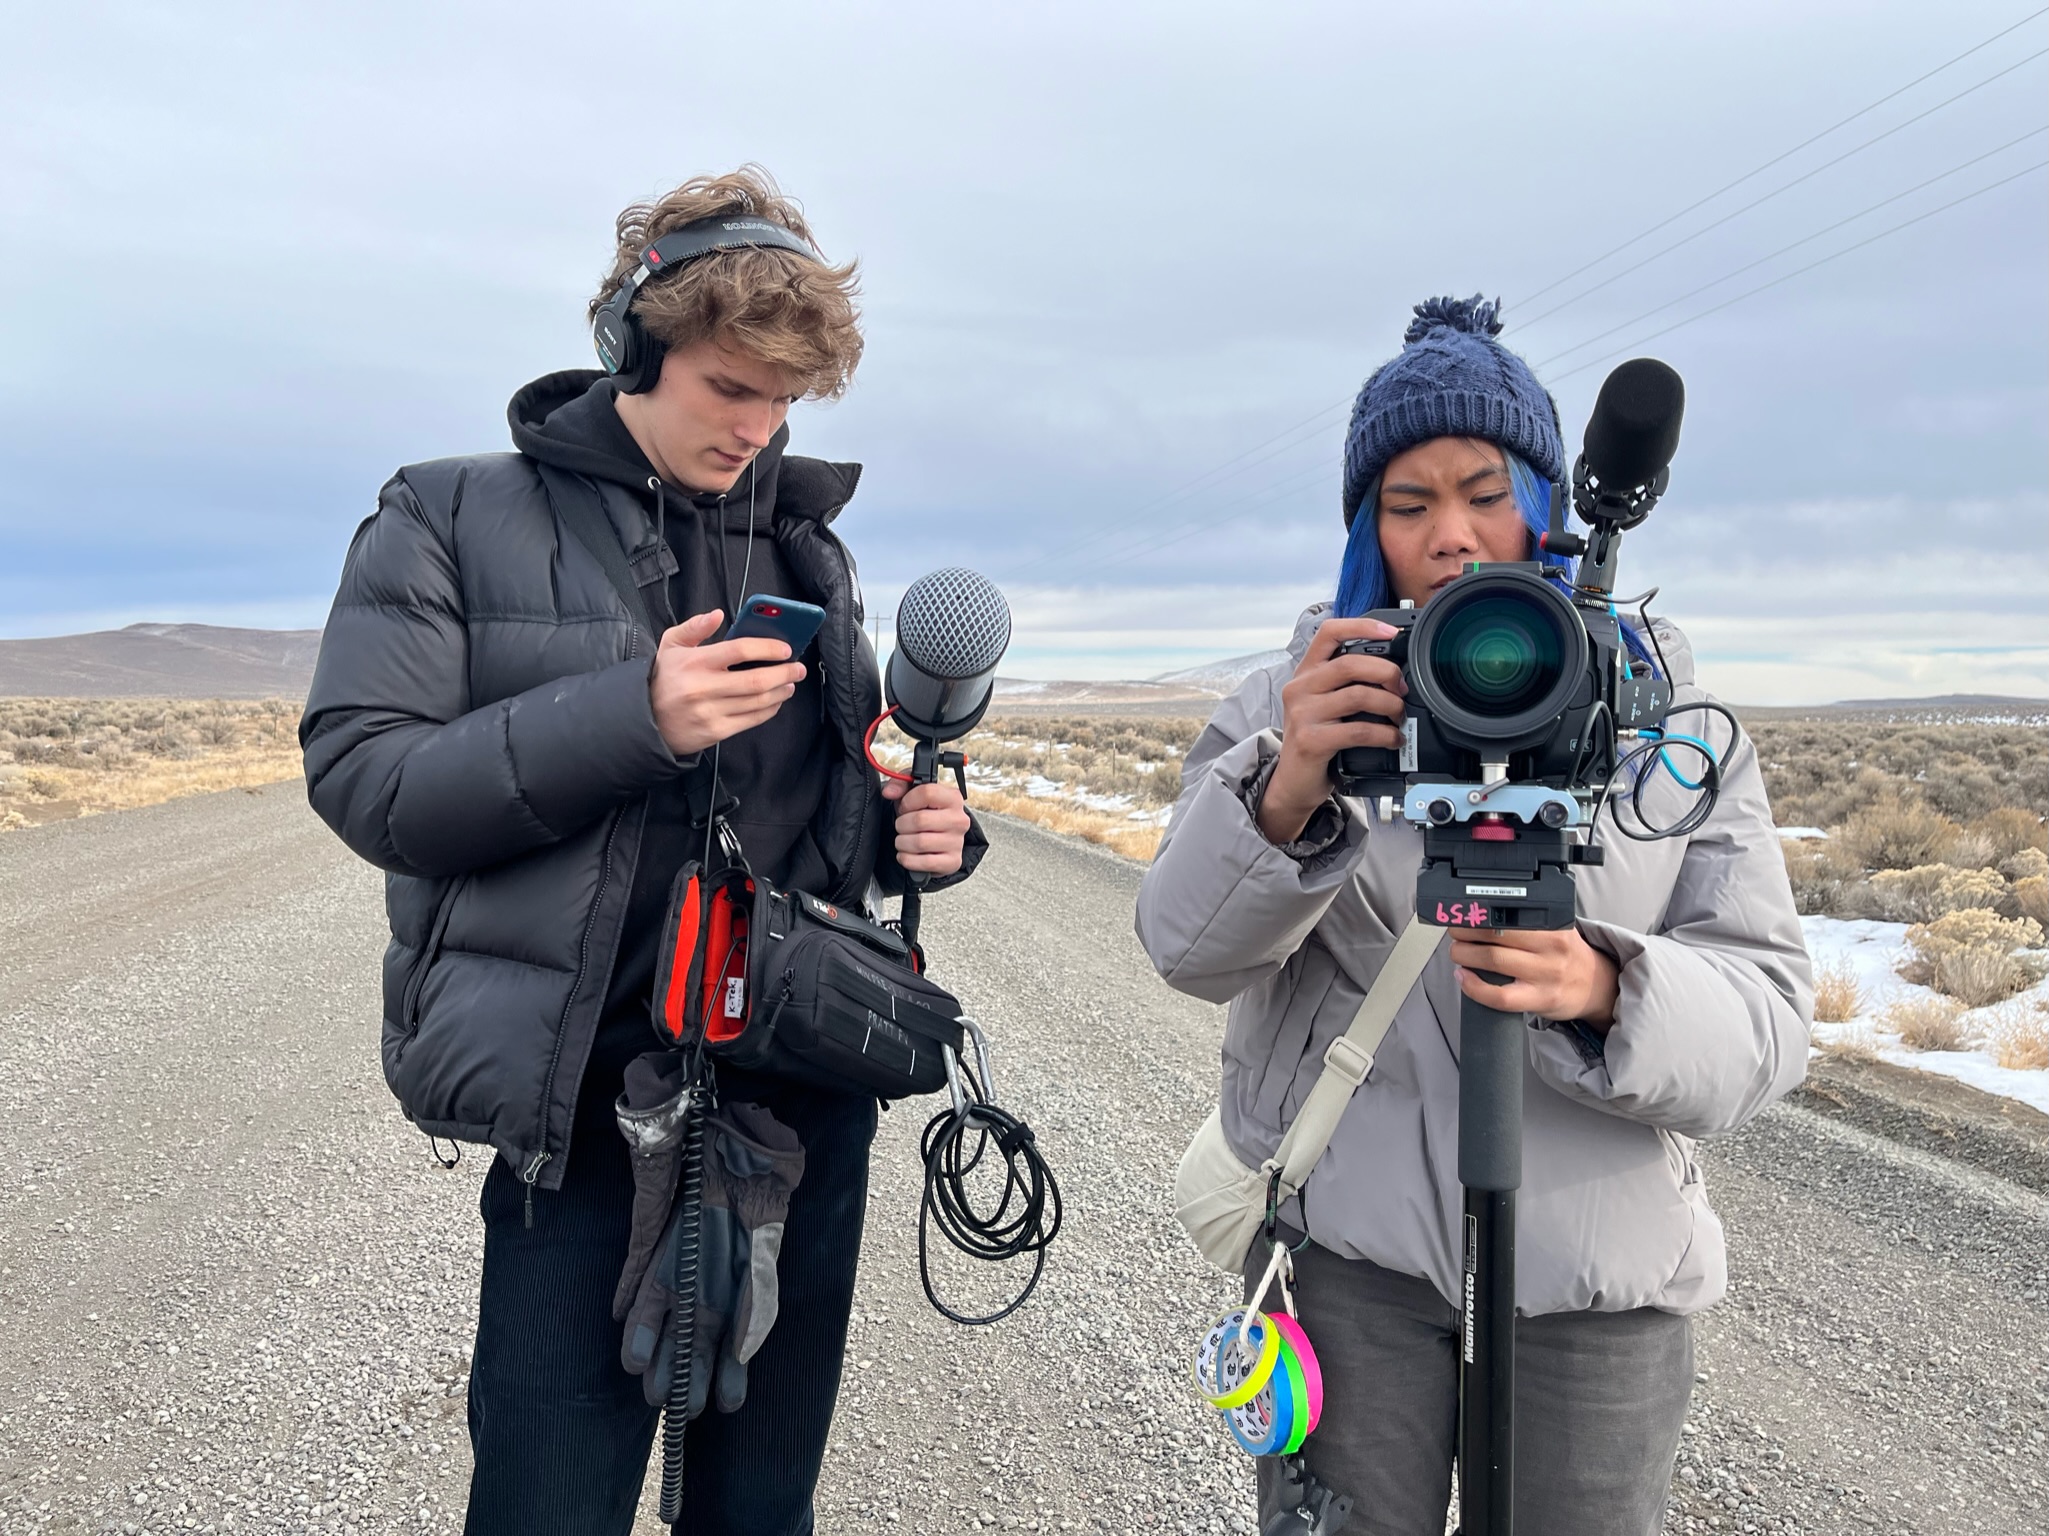 Two students stand on a road with a snowy field expanse around them. They are handling video and sound capturing equipment.